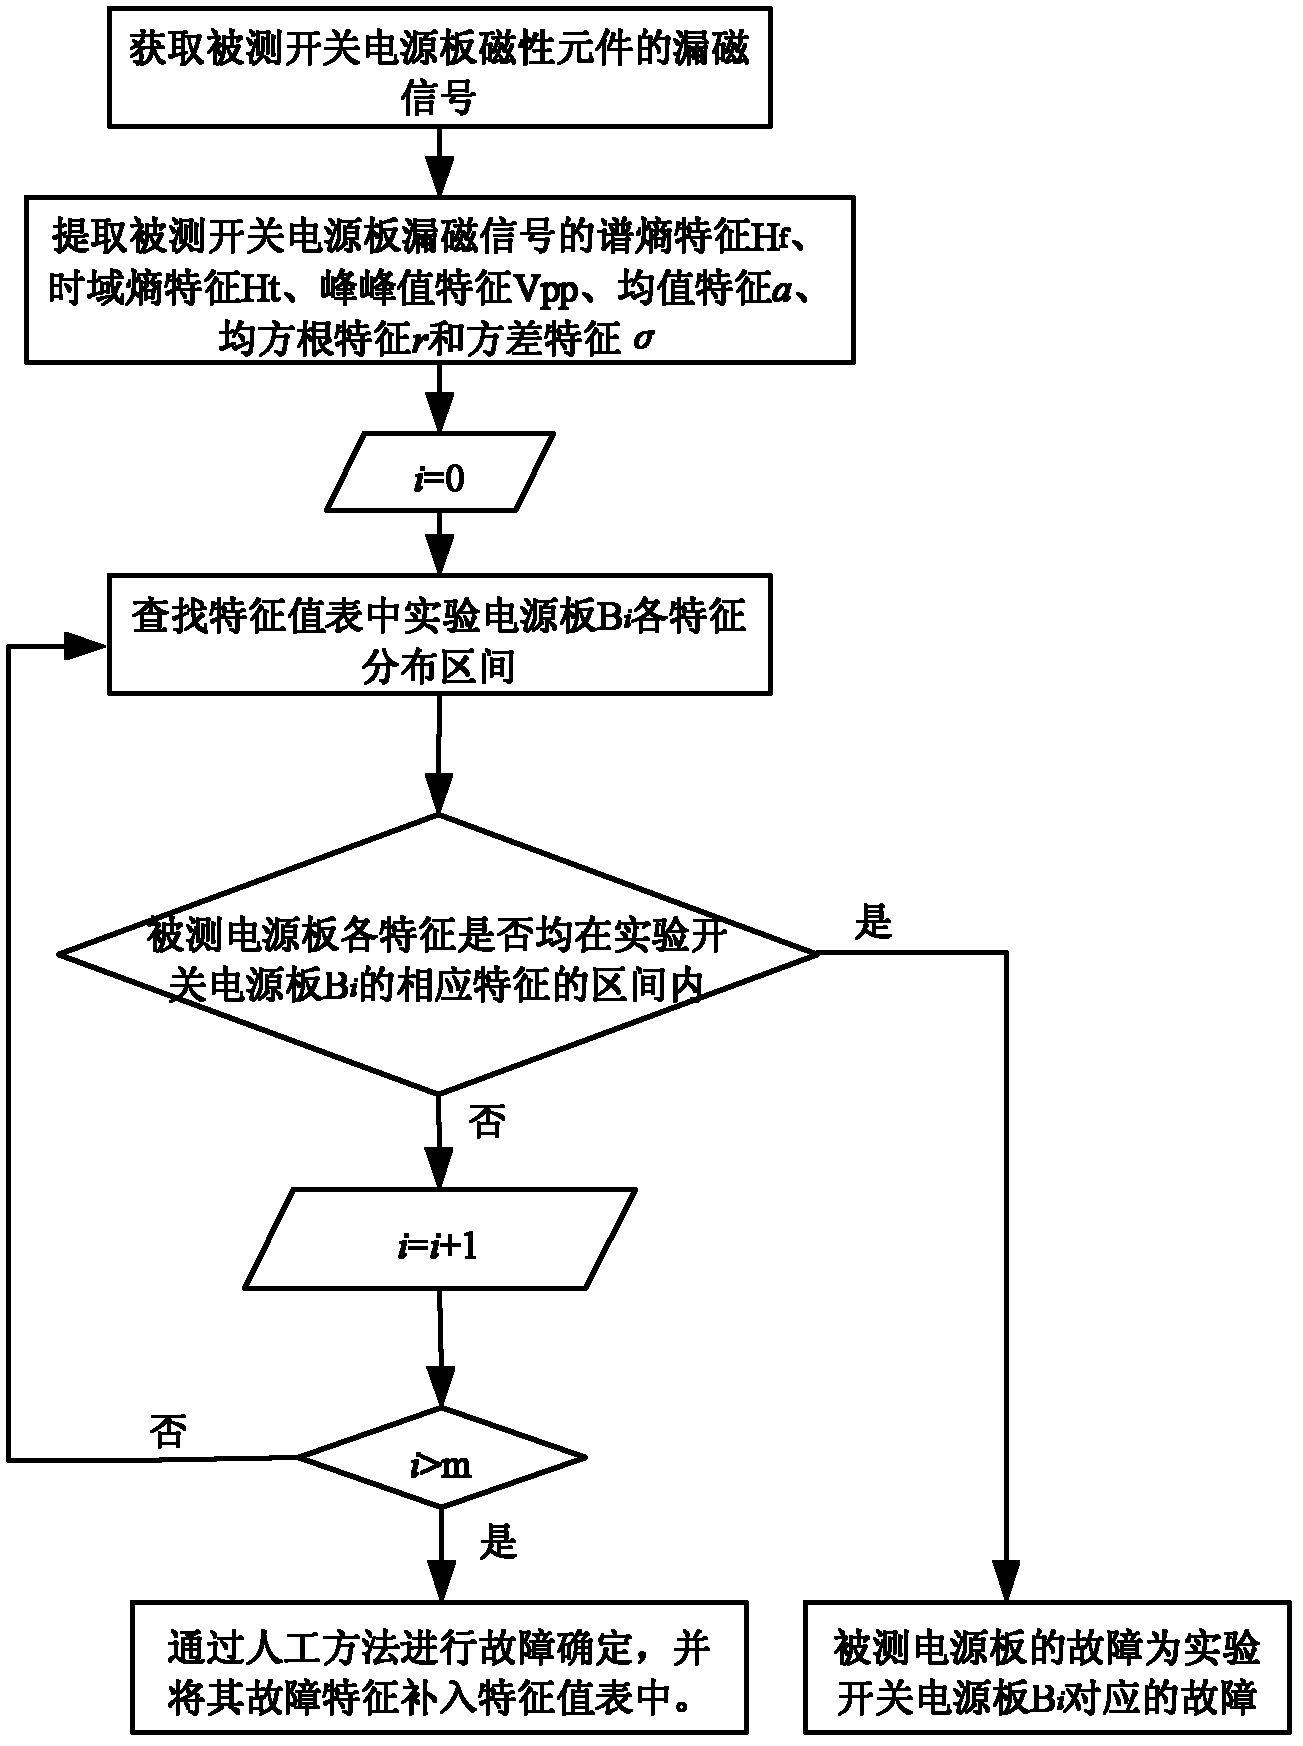 Information entropy principle-based method for fault diagnosis of switch power supply